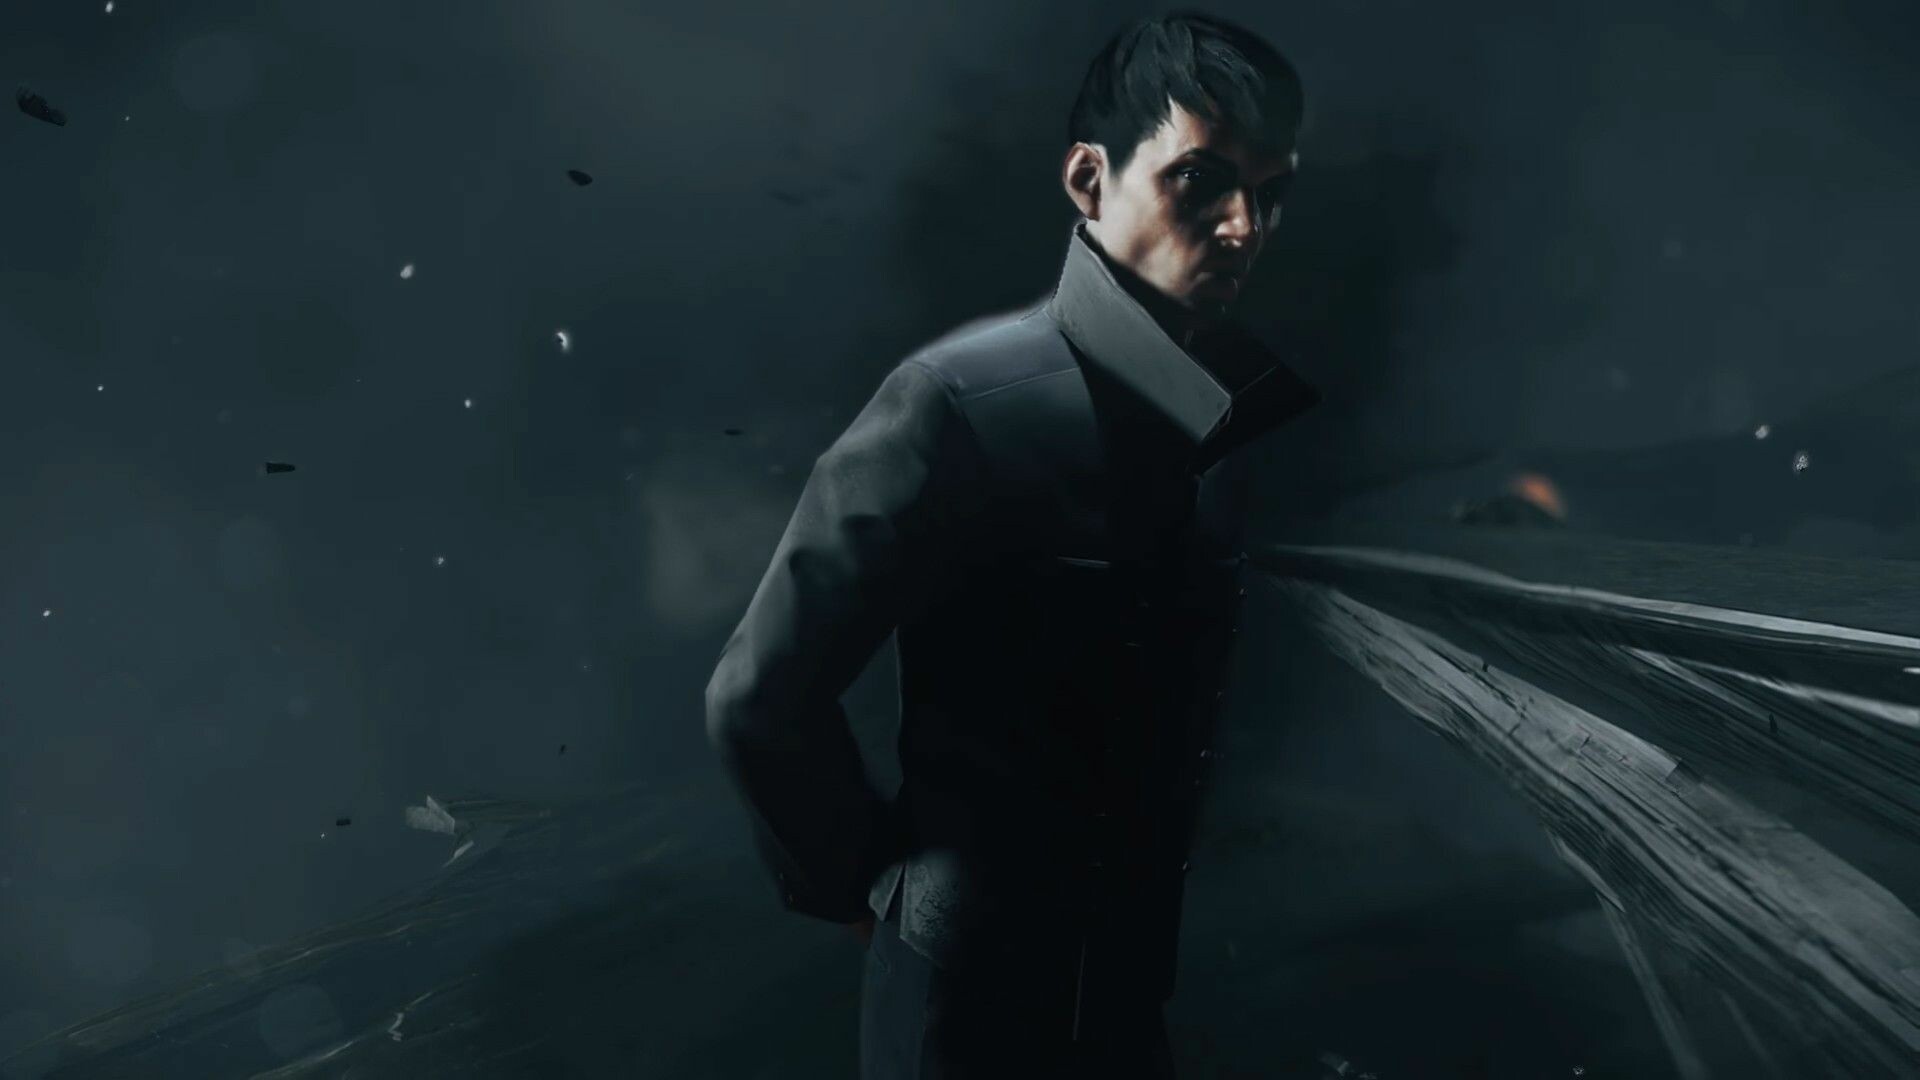 Dishonored: A 2016 action-adventure video game developed by Arkane Studios. 1920x1080 Full HD Background.